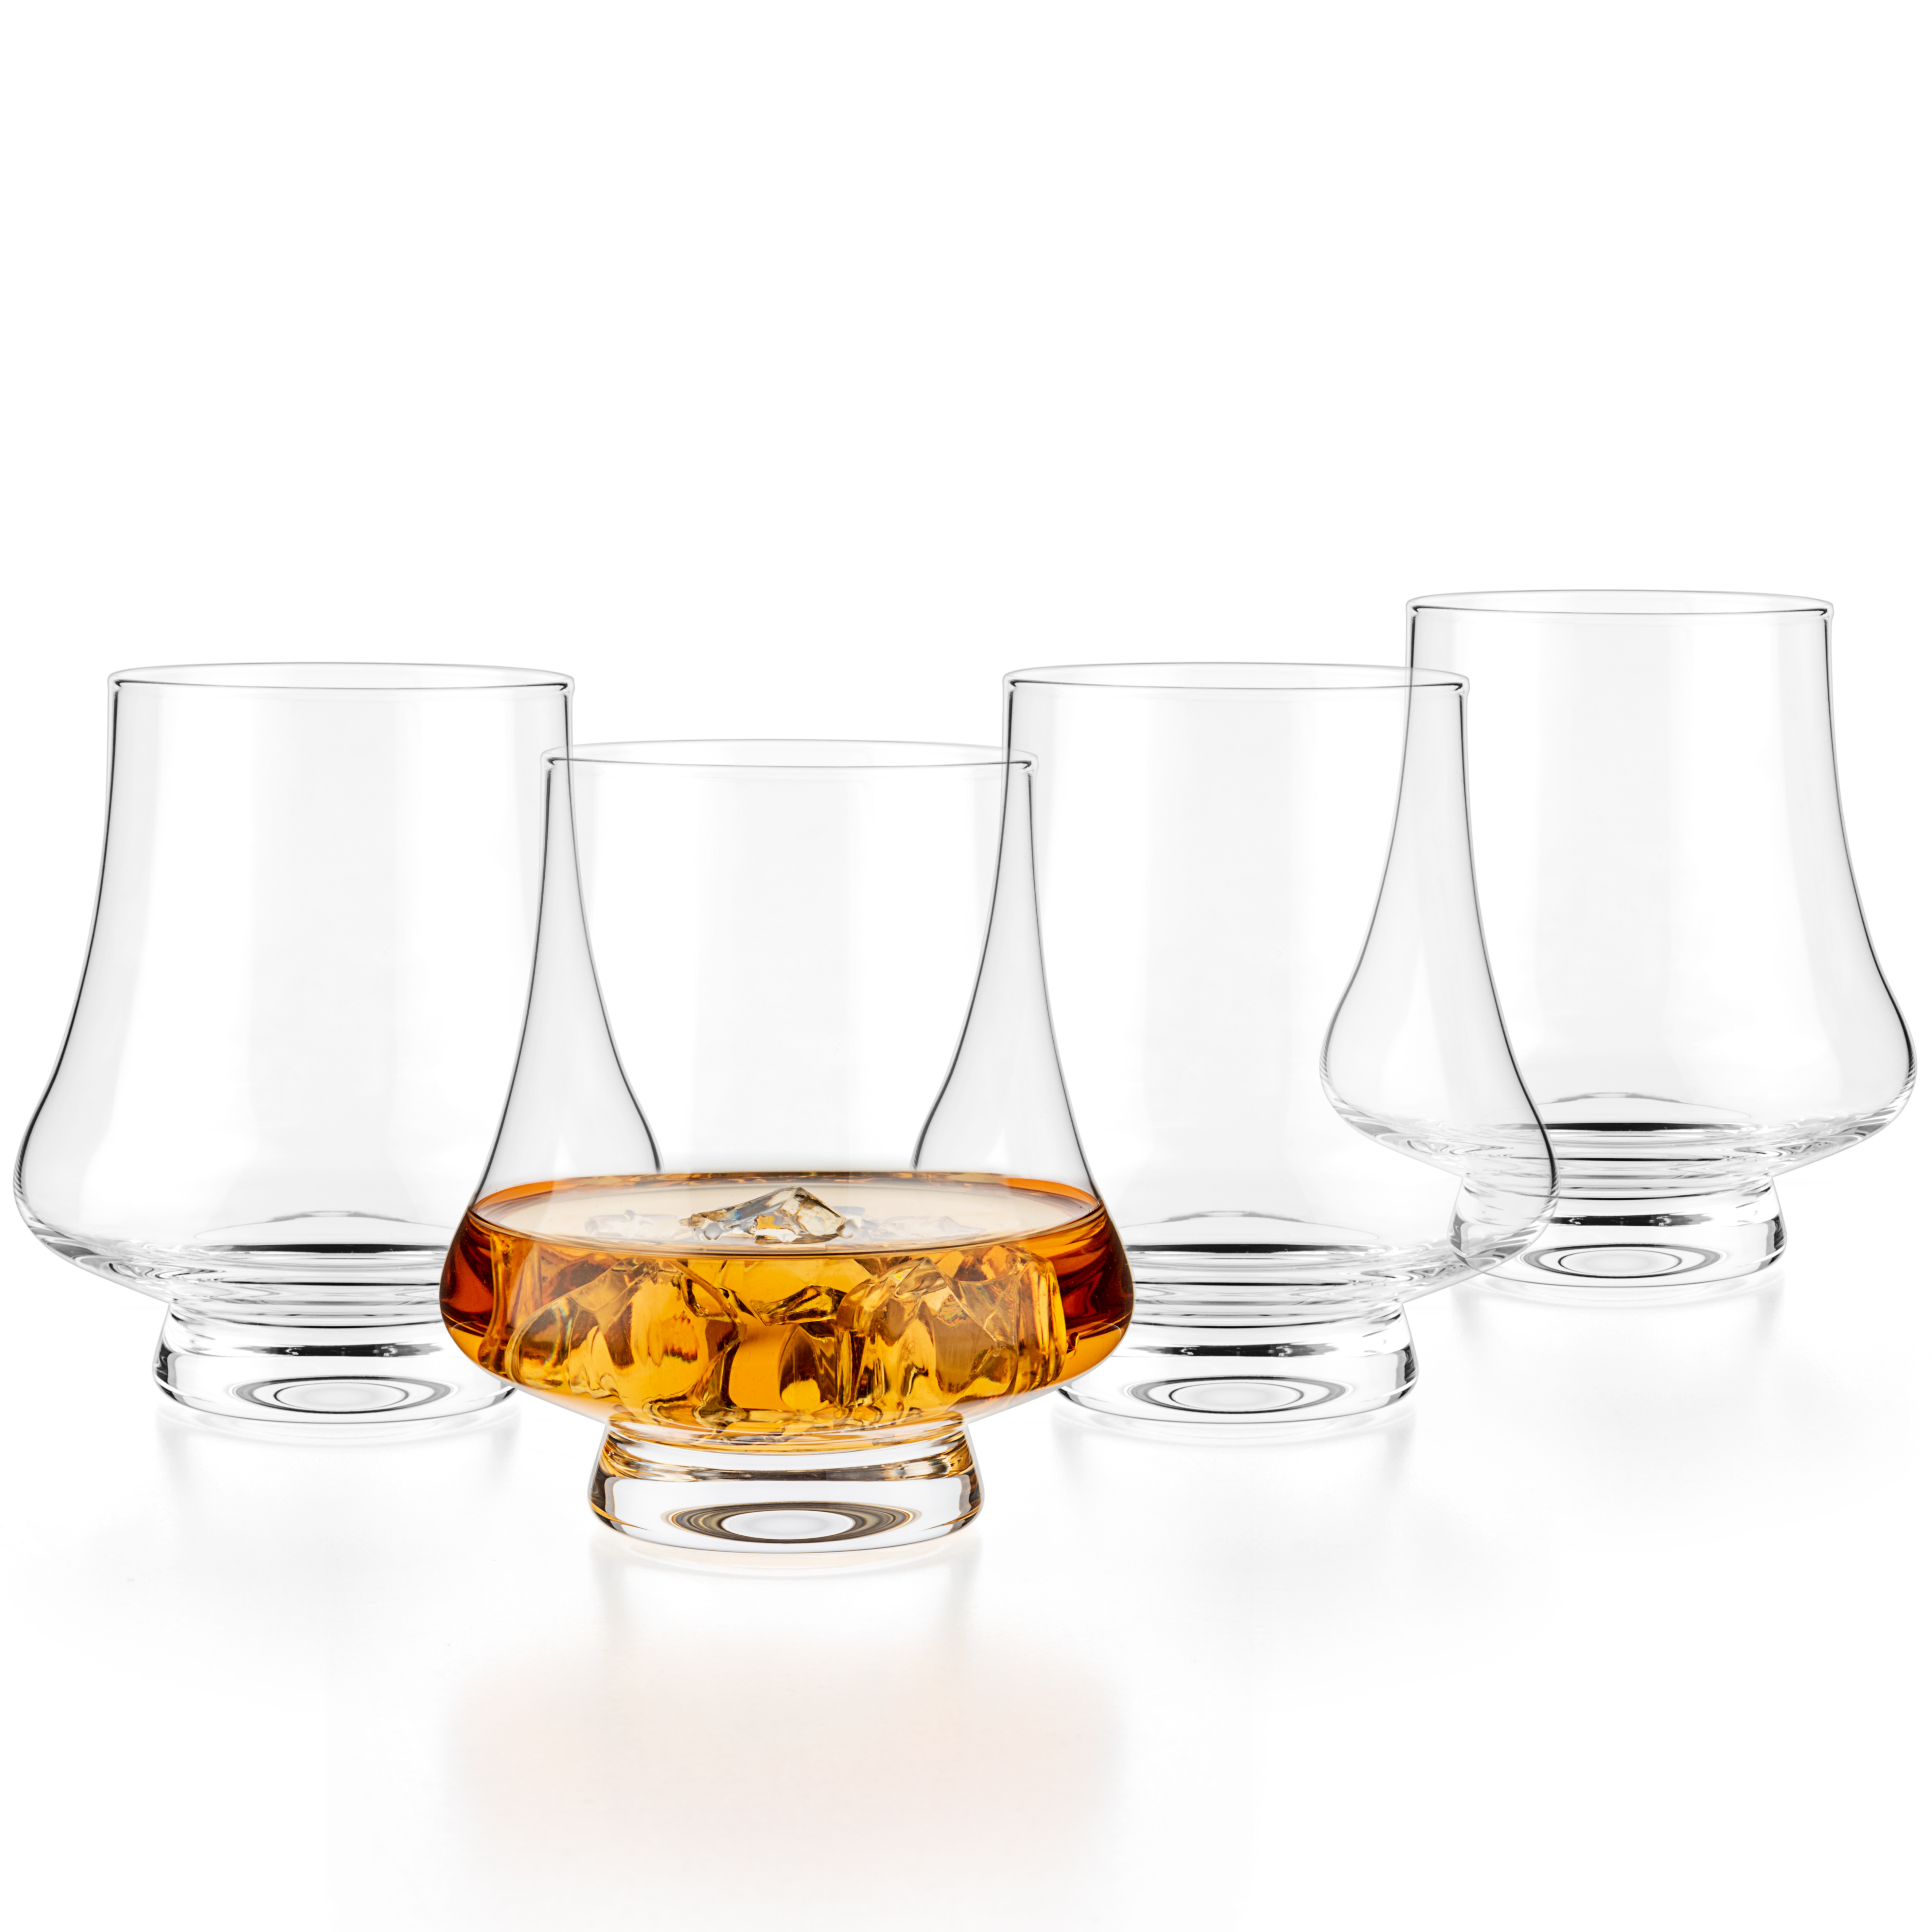 MULSTONE Scotch Whiskey Cognac Snifter Glasses - Set of 4 - Crystal Whiskey  Glasses with Stems - Brandy Snifters Vintage-Style - Beautiful Barware for  Bar Décor